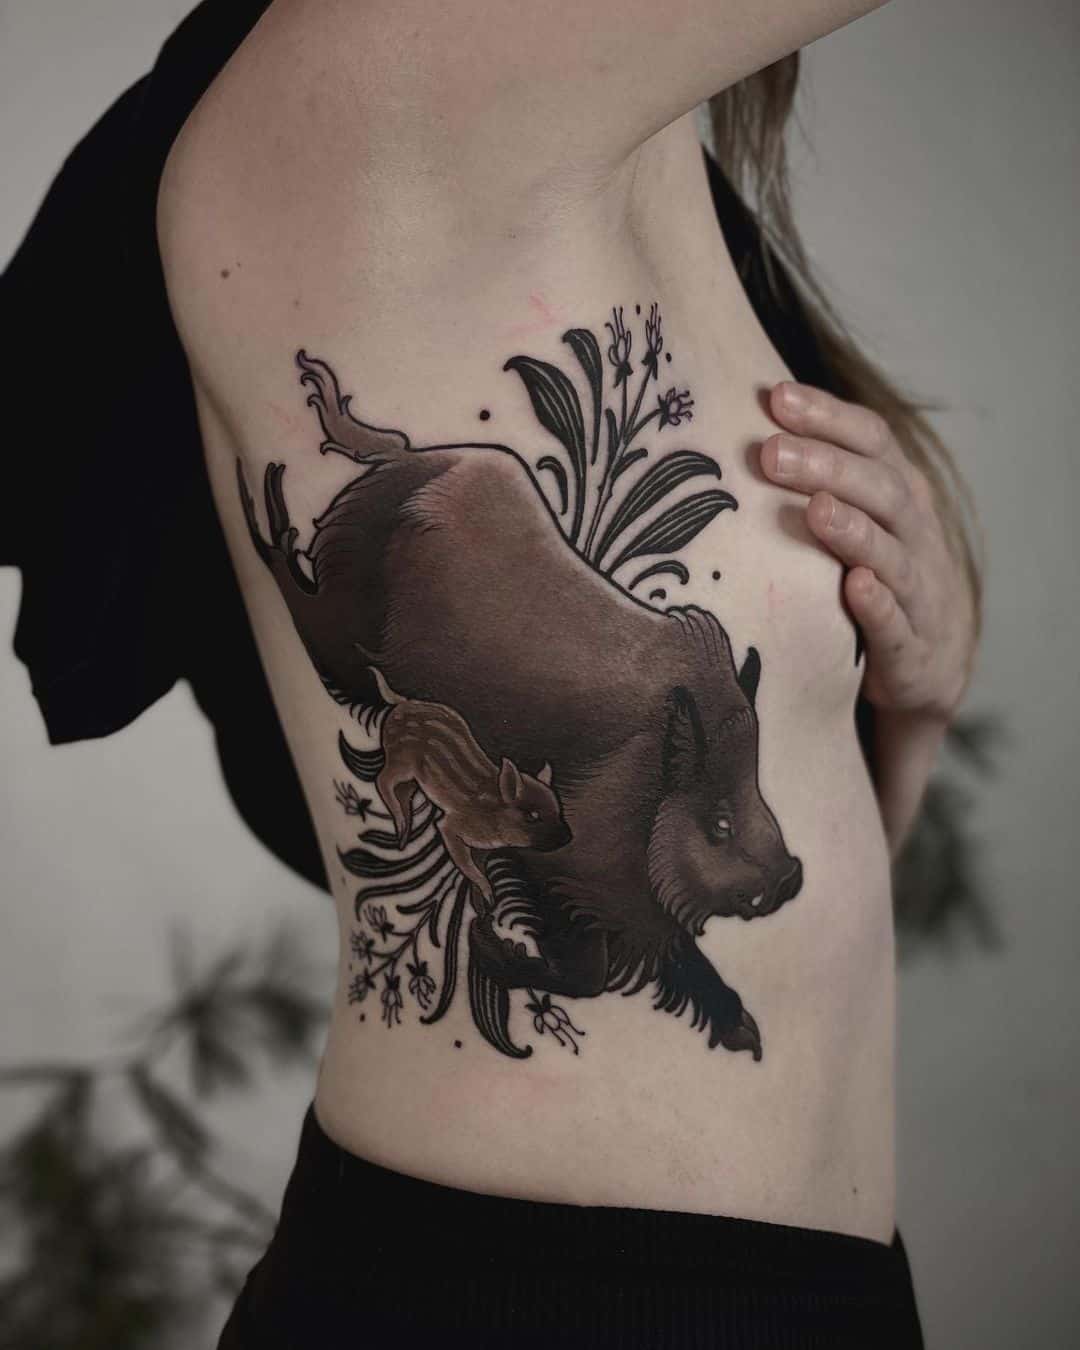 The Rising Popularity Of Pig Tattoos